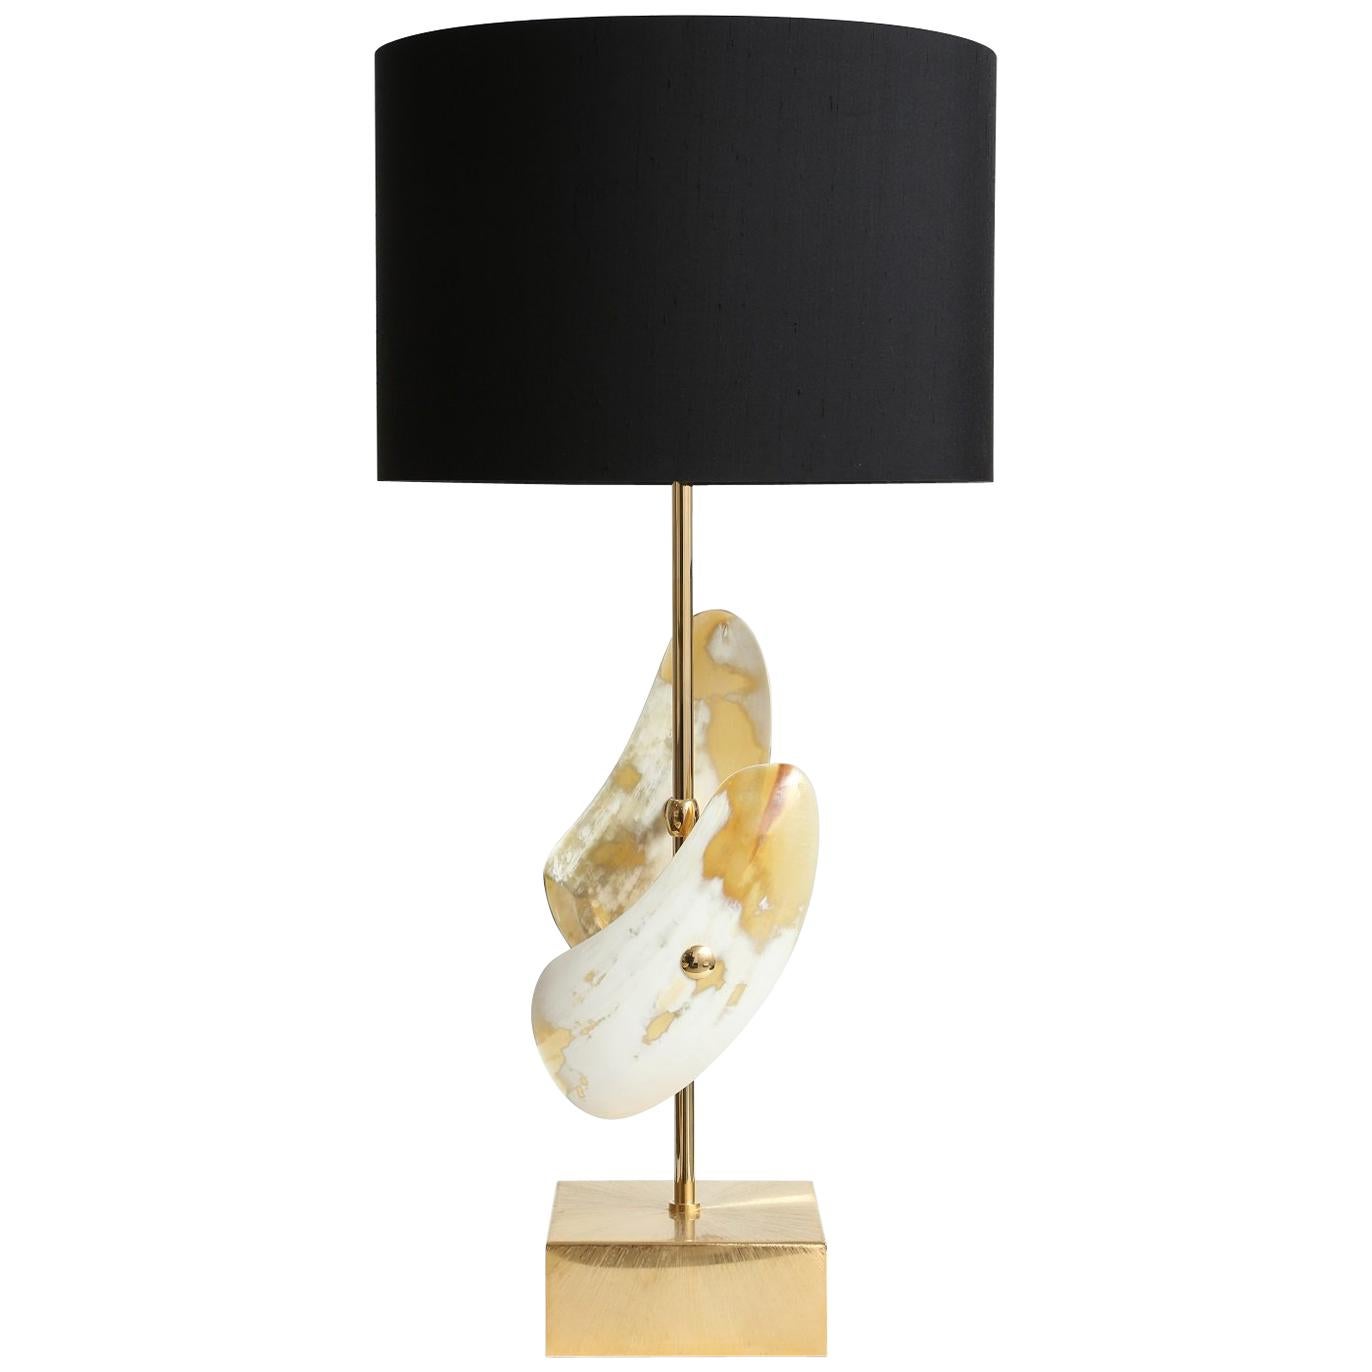 Arcahorn Table Lamp with Horn Details and Brushed Gilded Brass Base For Sale